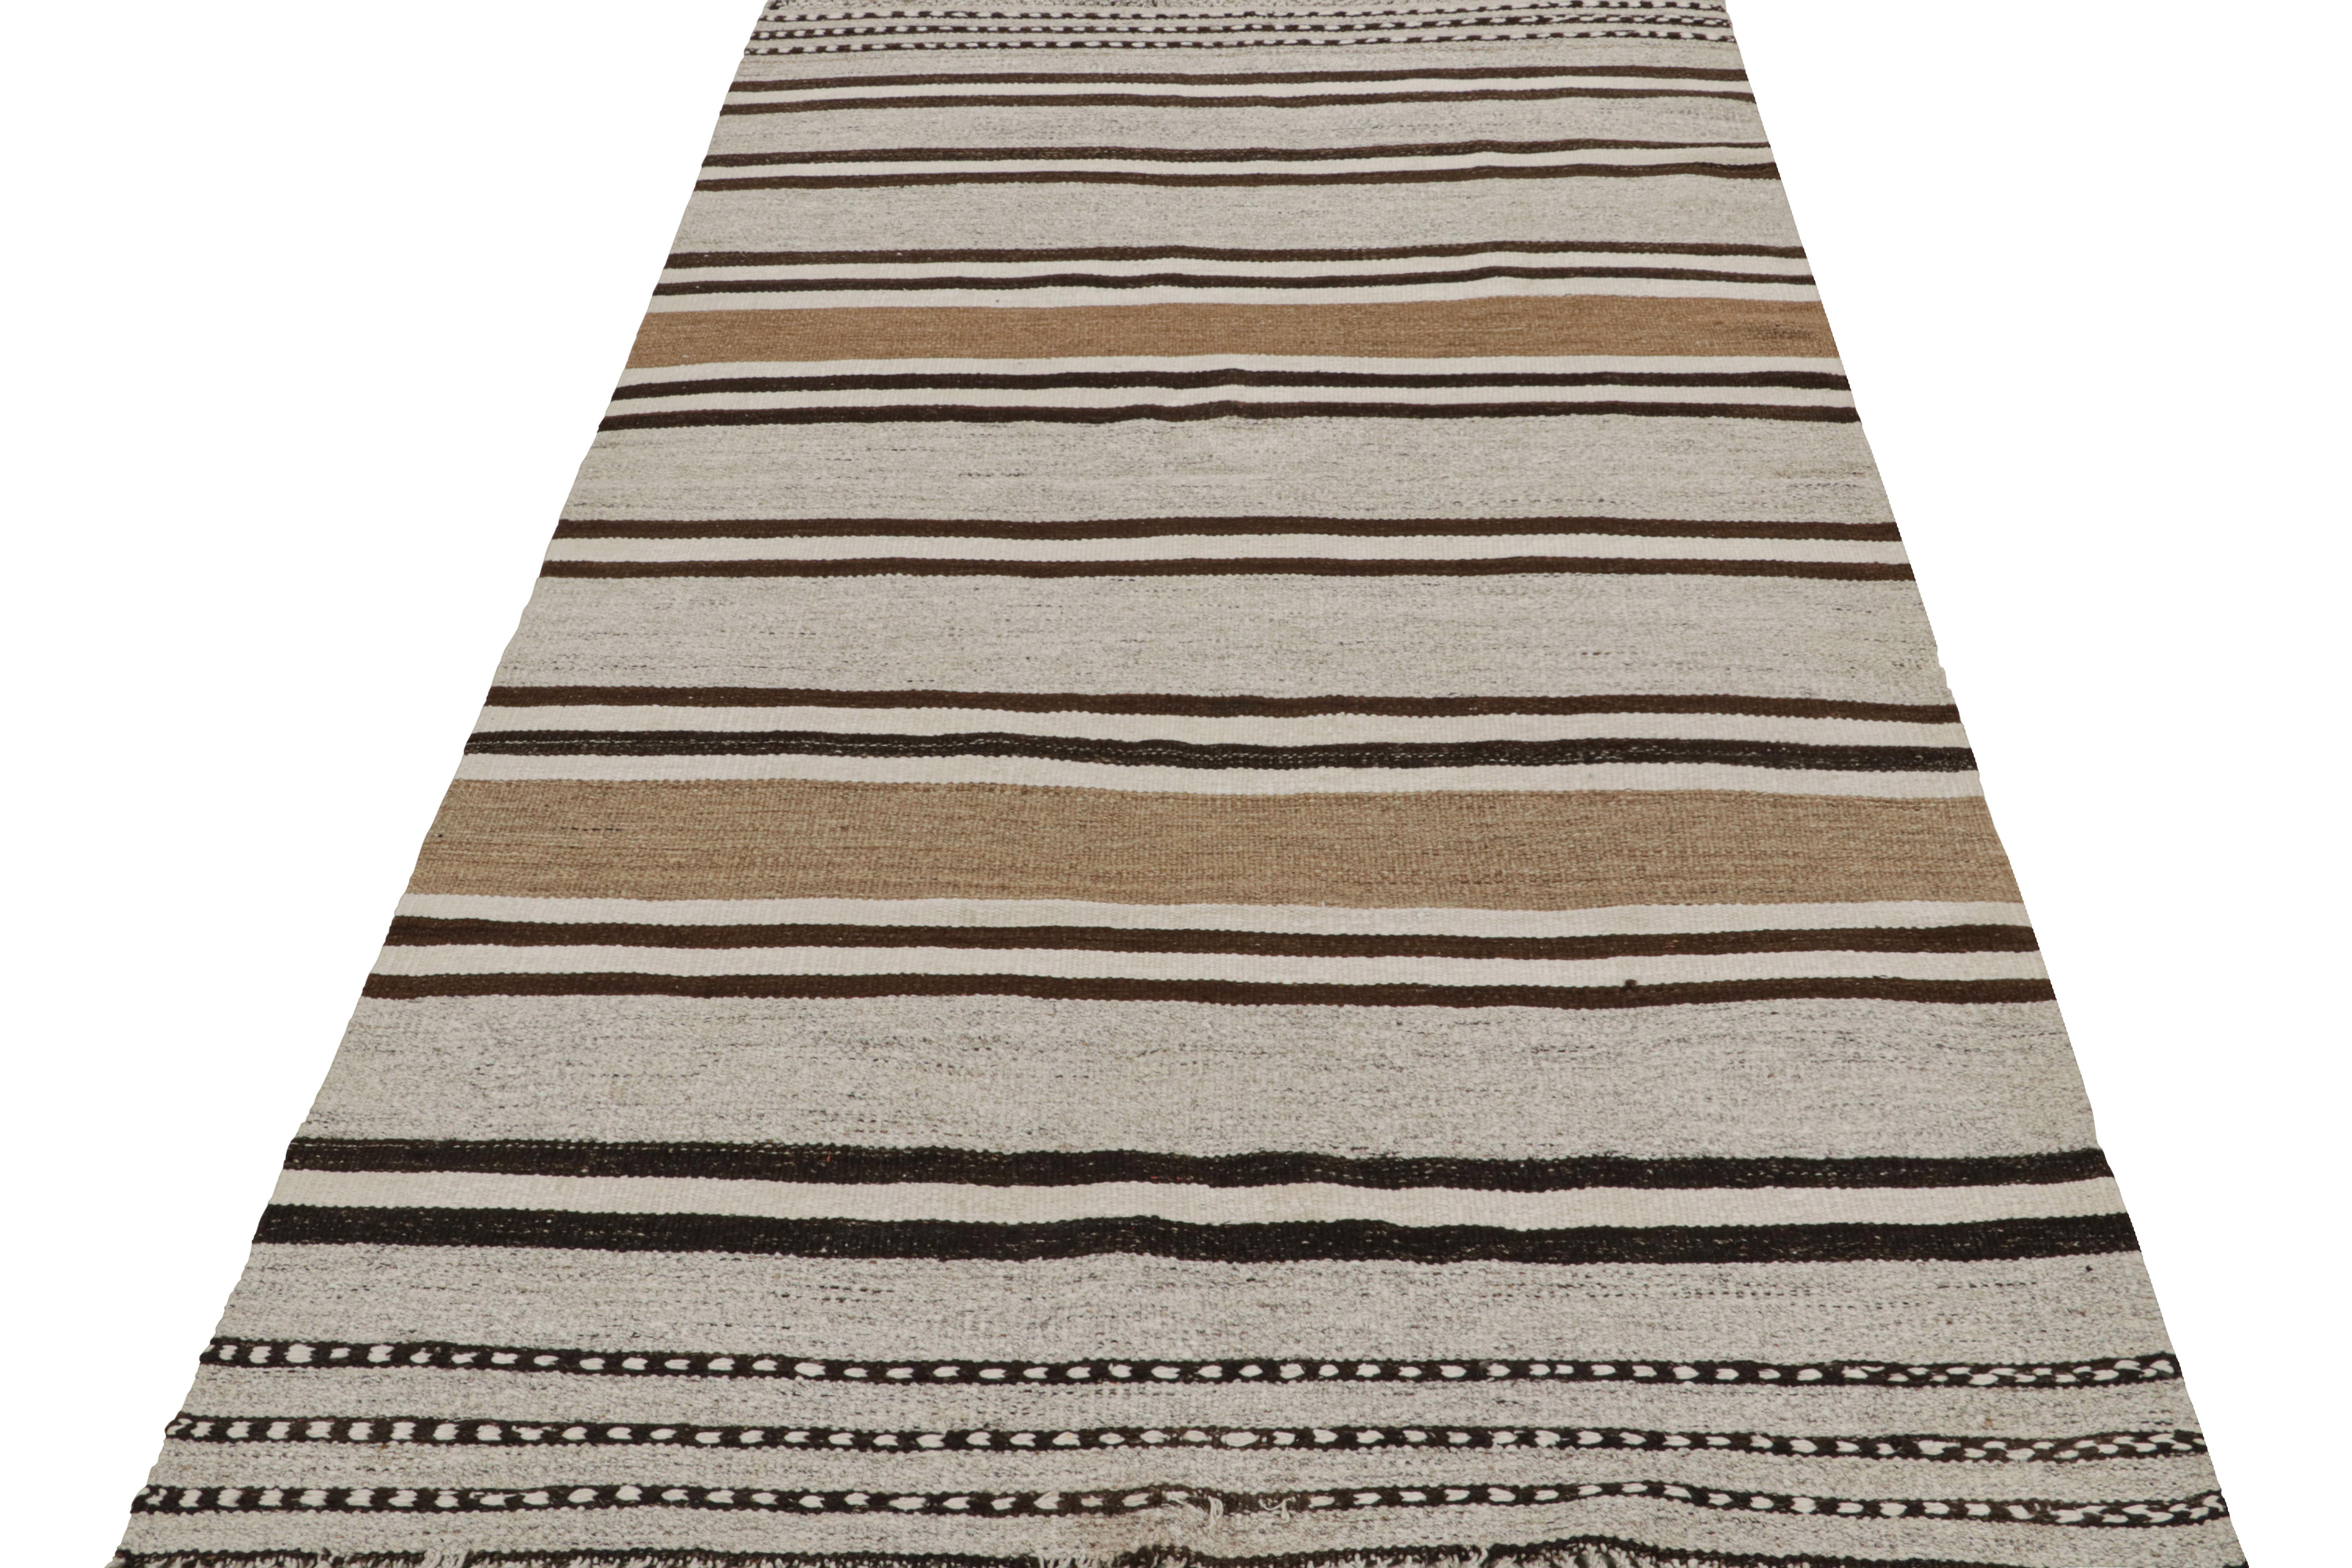 Hand-Woven Vintage Afghan Tribal Kilim rug, in Silver/gray, from Rug & Kilim